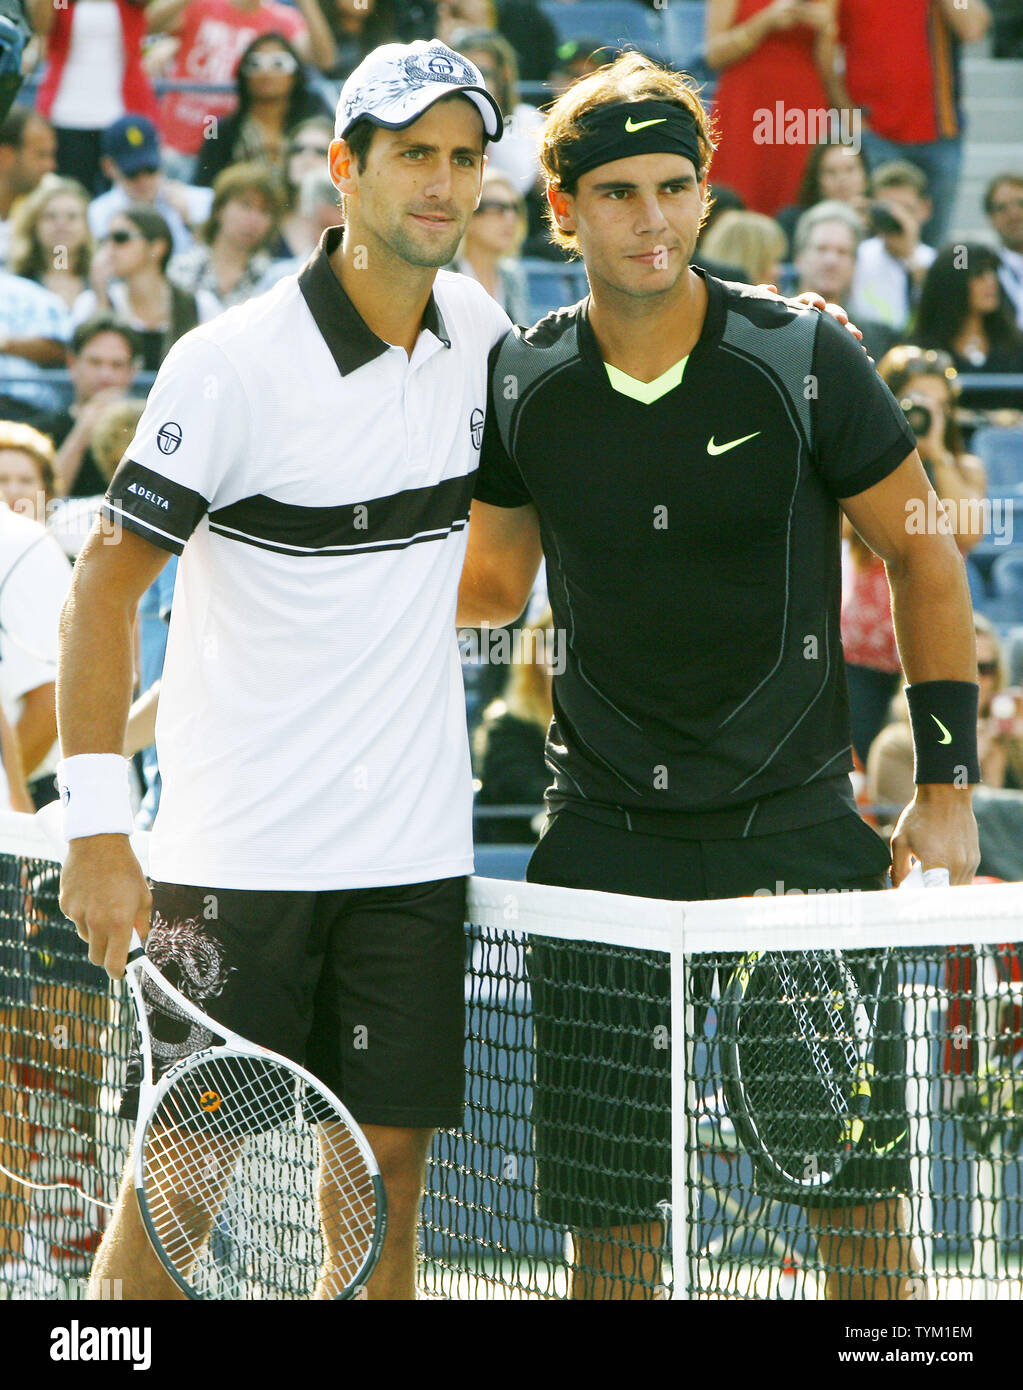 Third-seed Novak Djokovic (L) of Serbia and top seed Rafael Nadal of Spain  pose together before the start of their mens' final match at the U.S. Open  held at the National Tennis